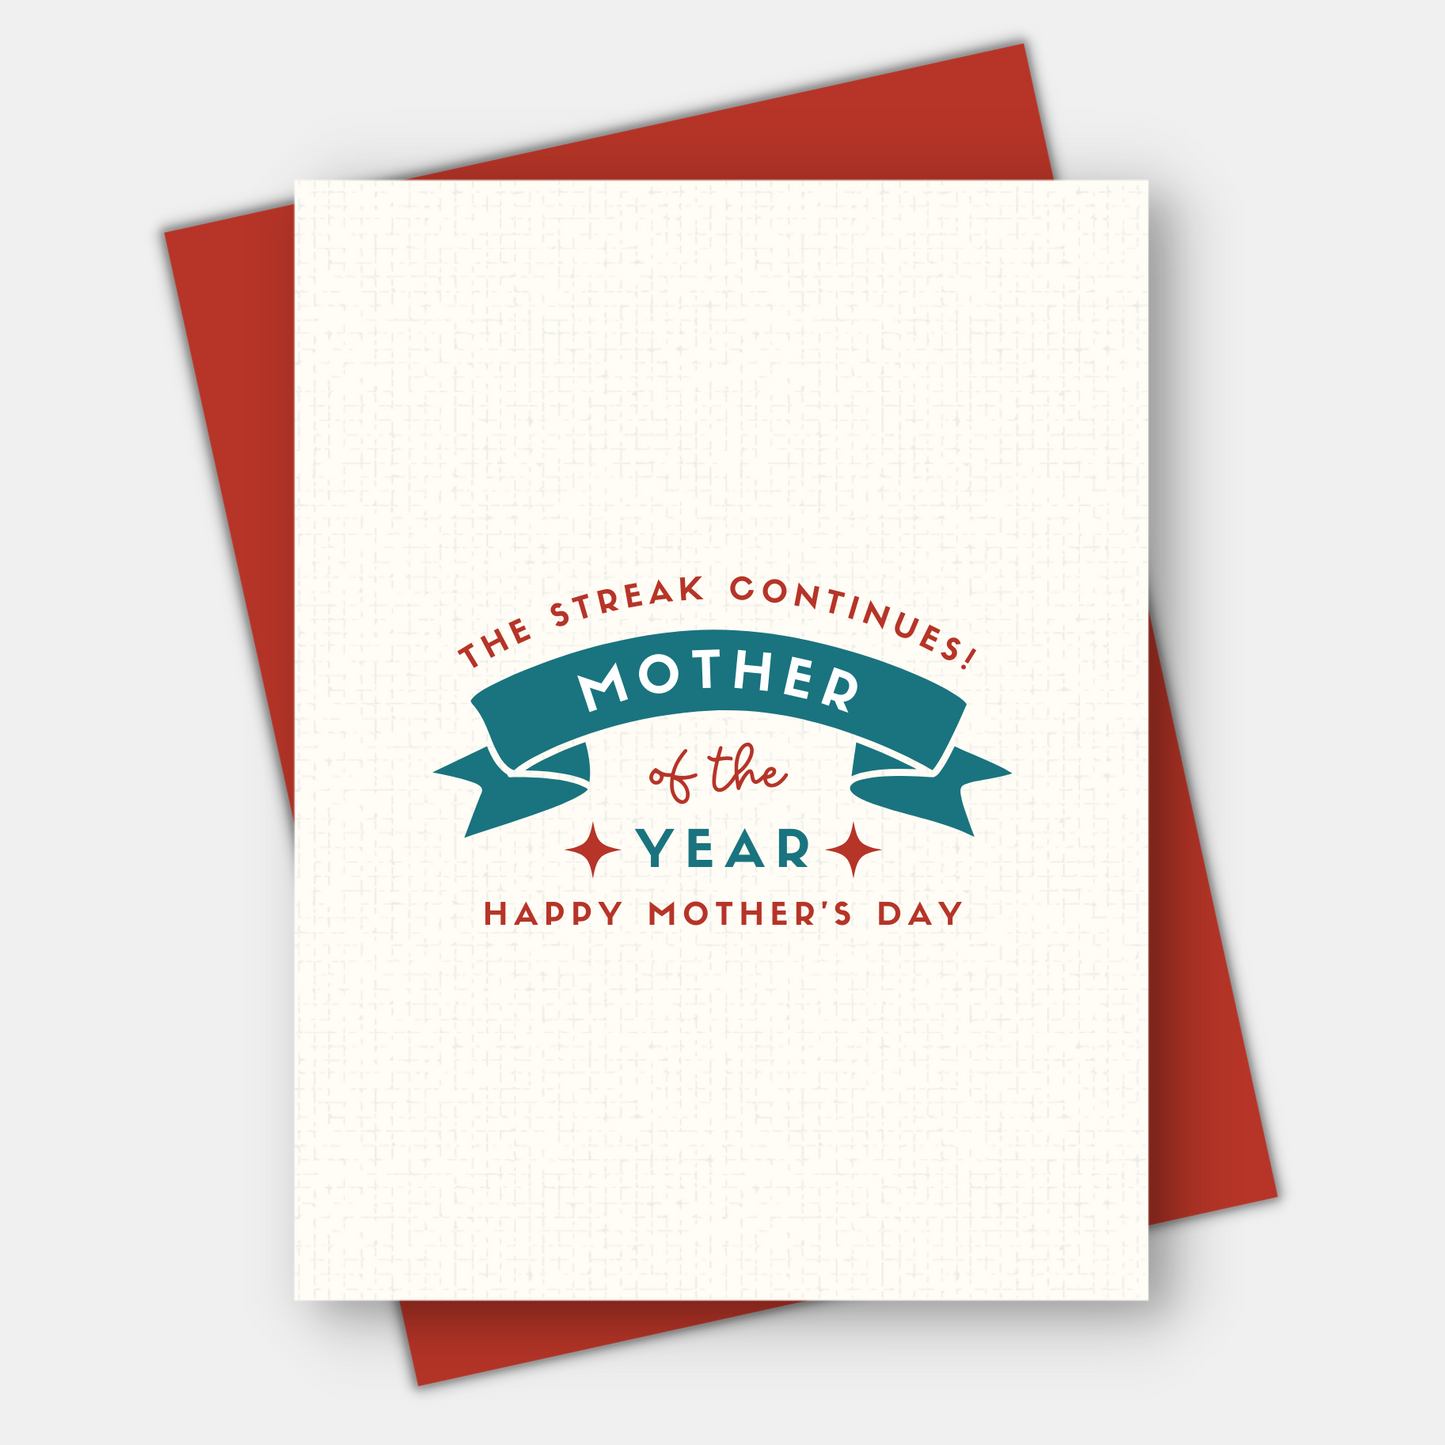 Mother of the Year, Mother's Day Card